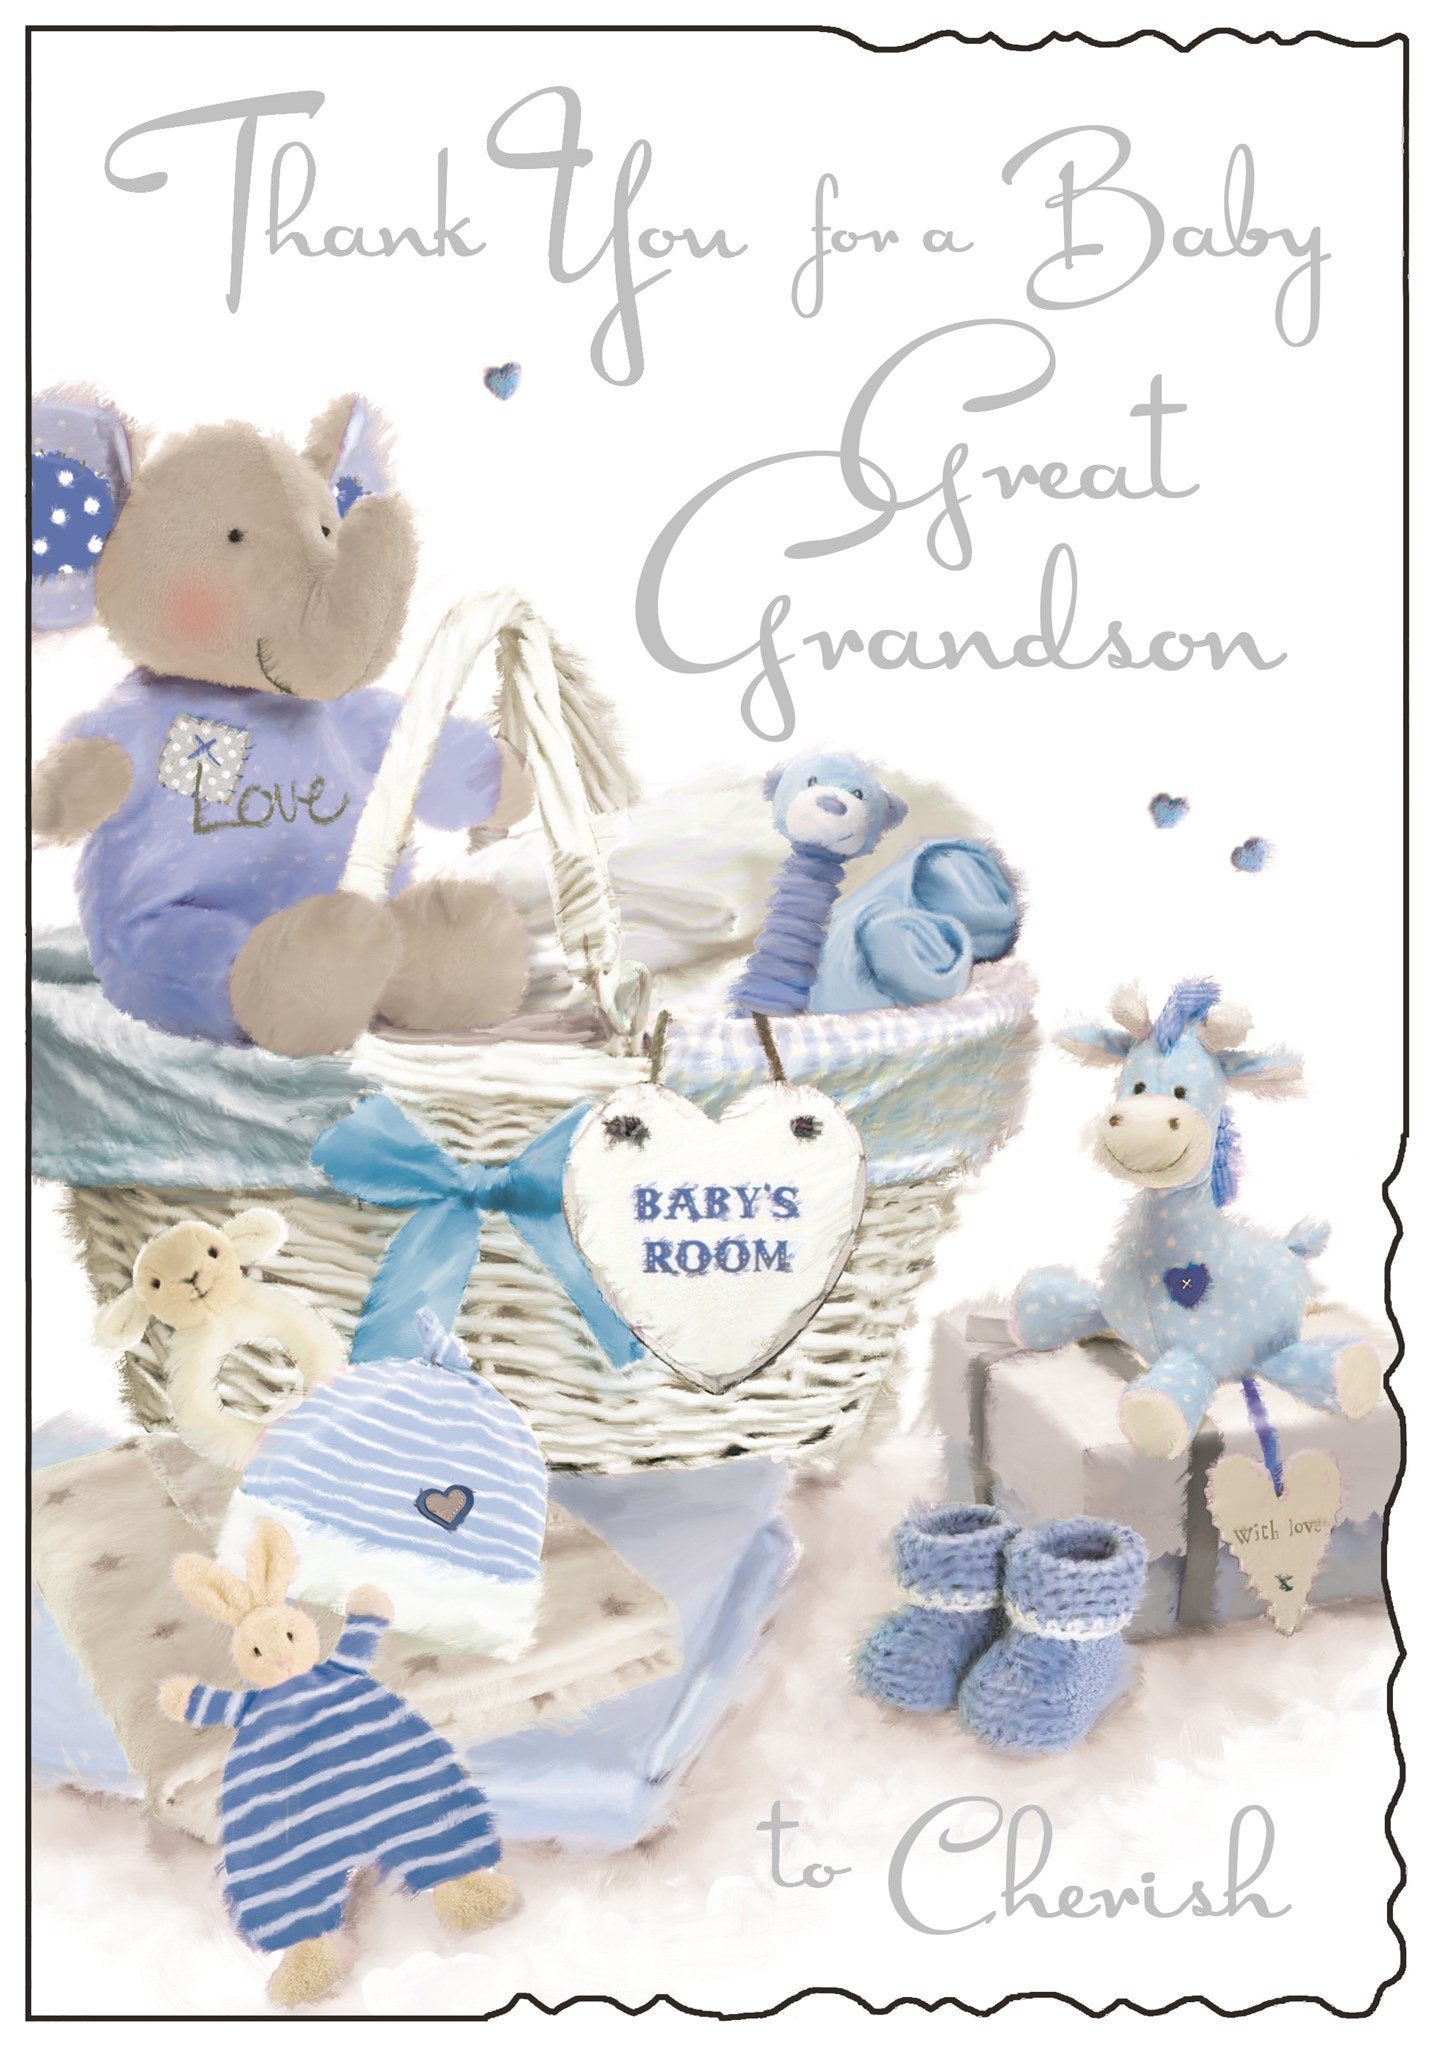 Front of Thank You for a Great Grandson Greetings Card